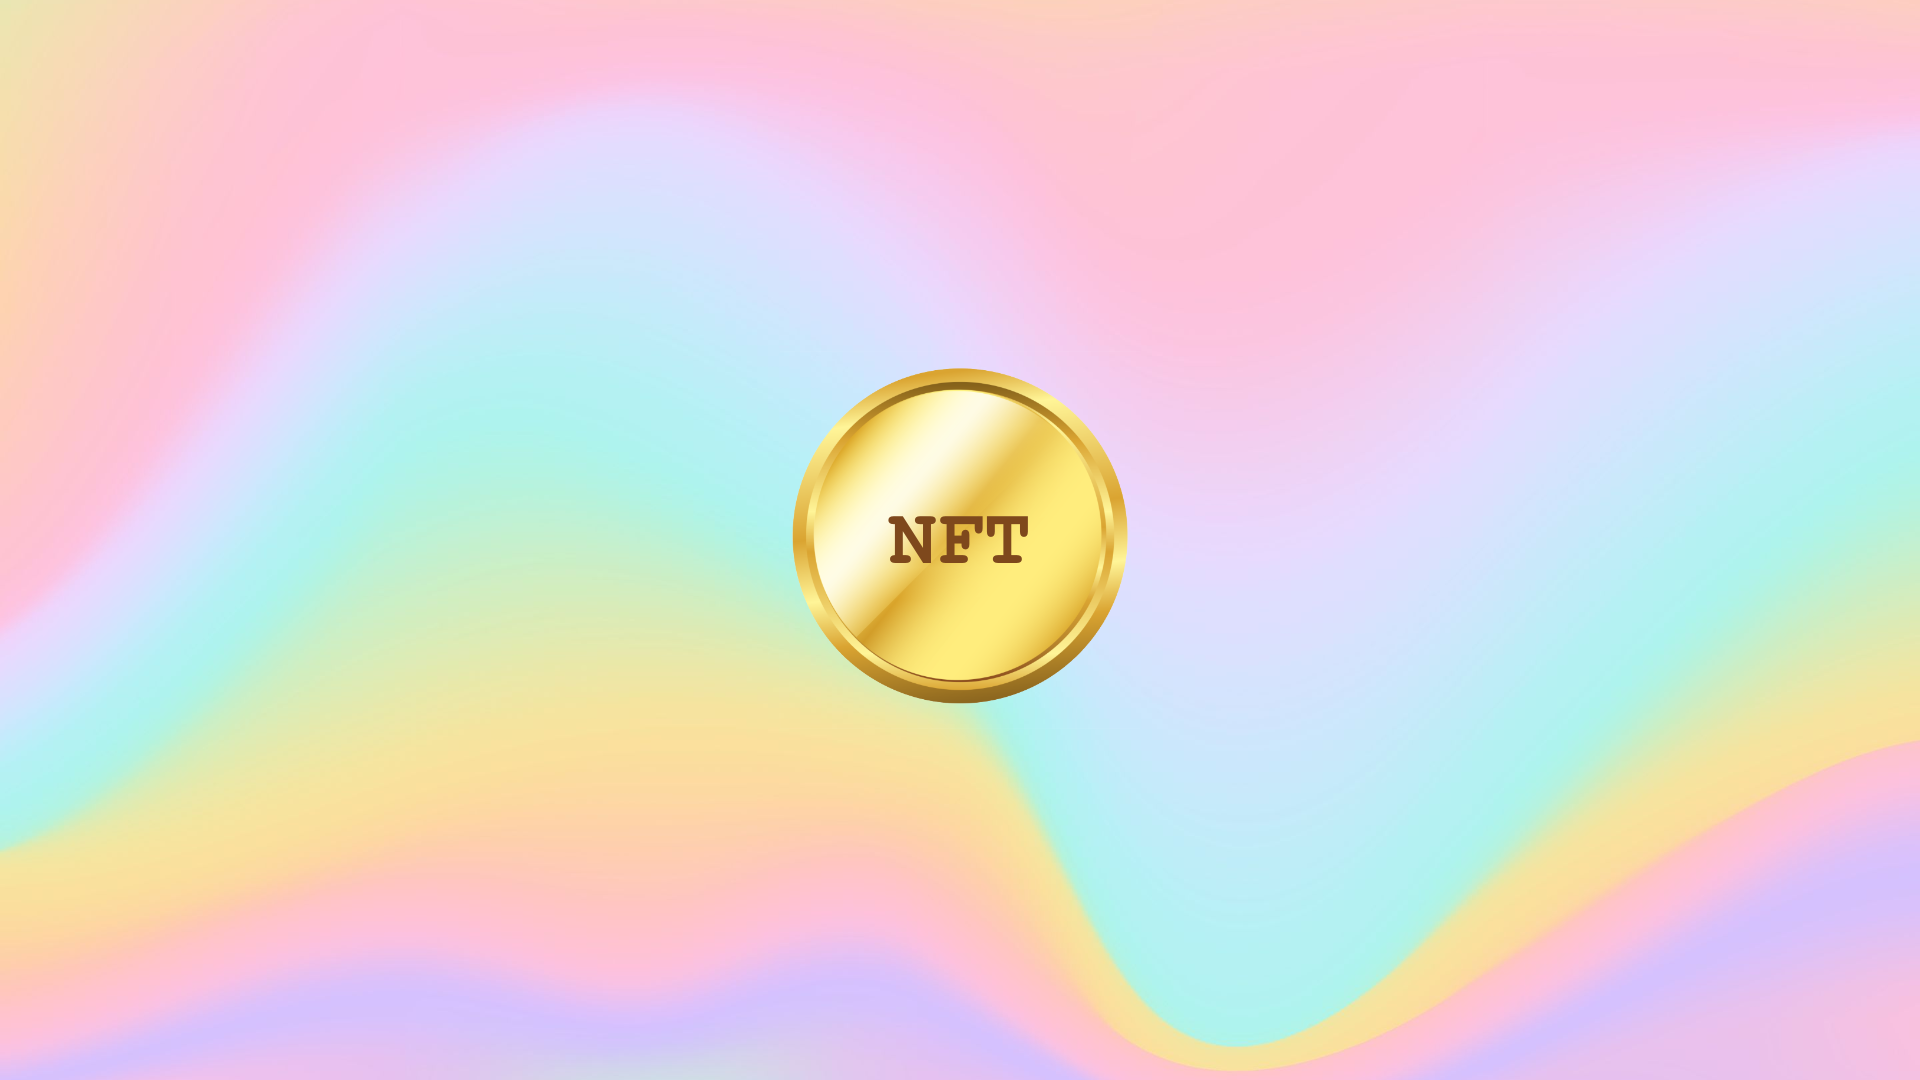 How To Make Nft For Free / How To Create An Nft For Free With Gasless